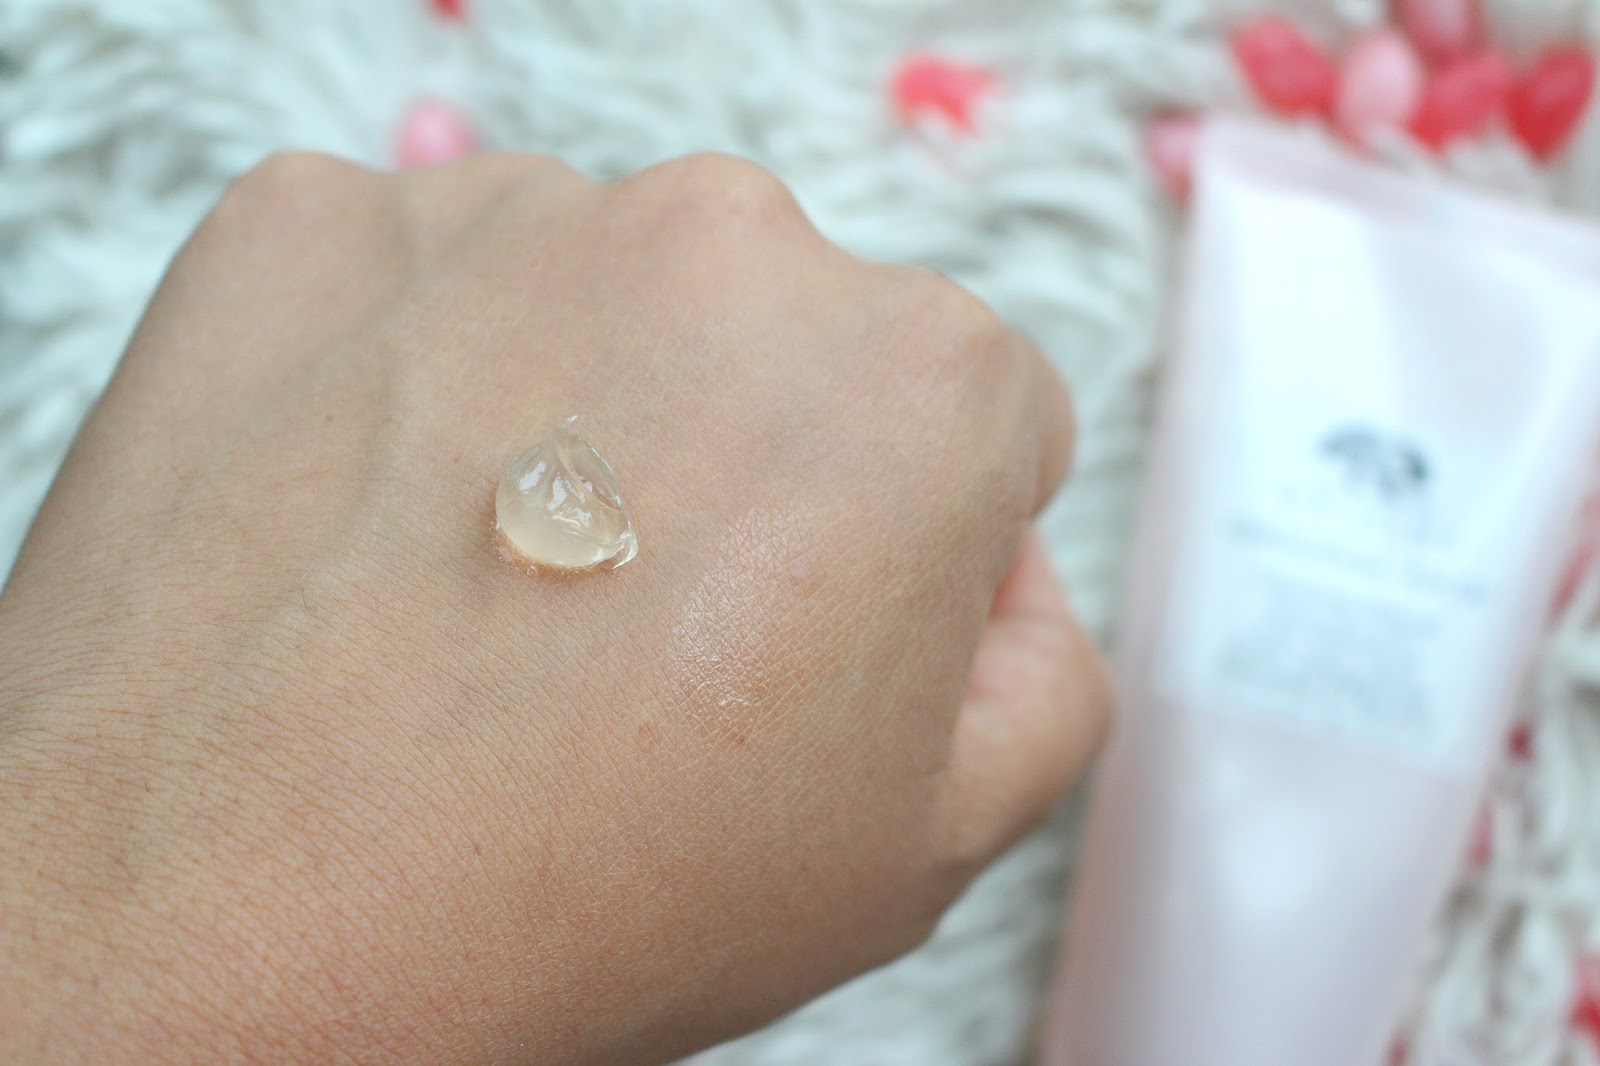 Samantha Origins Cleansing Makeup Removing Jelly Review